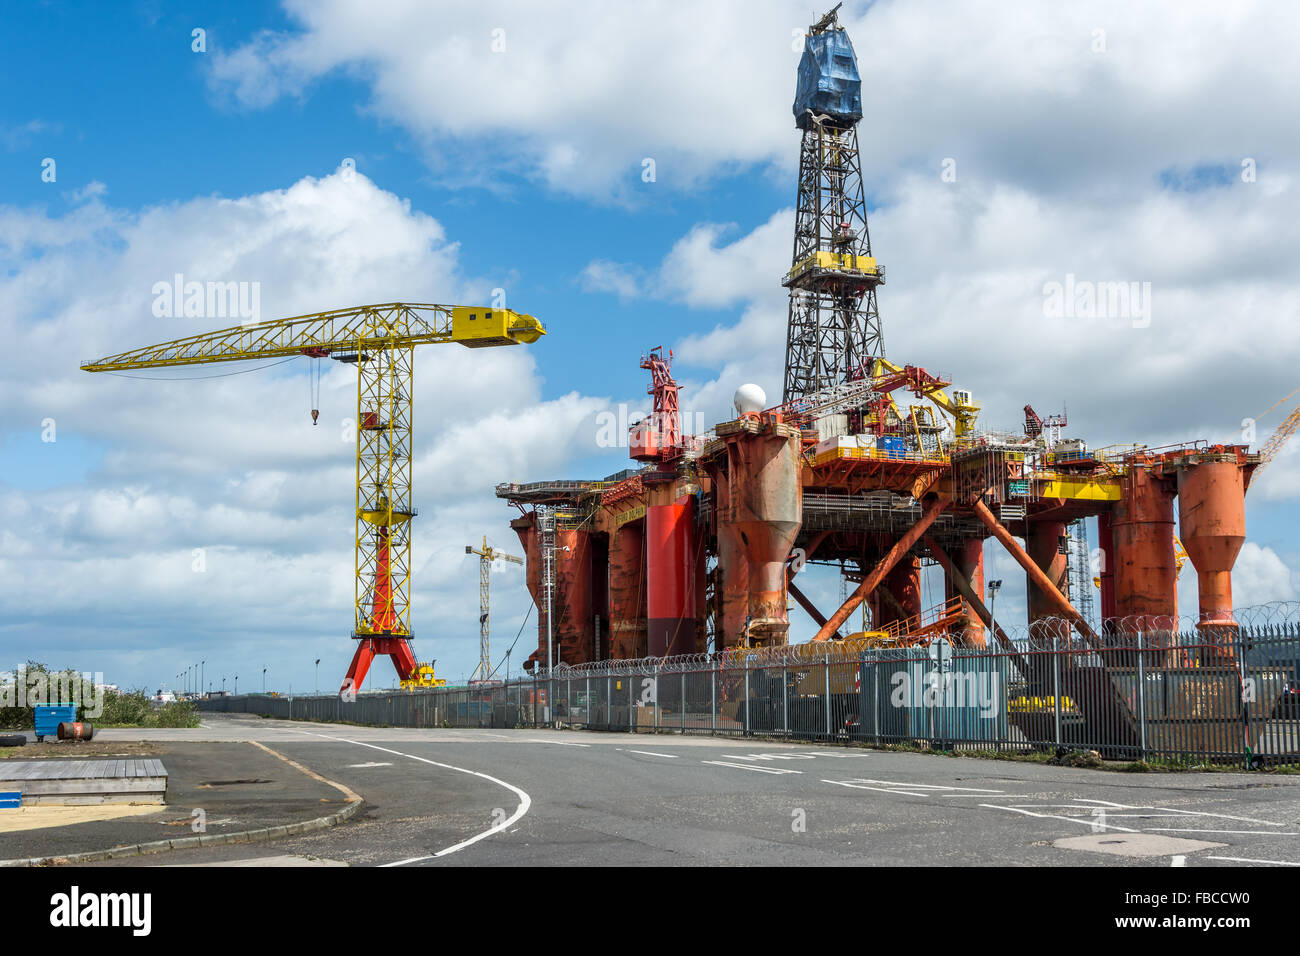 Huge oil rig in for repair work in Harland and Wolff shipyard Belfast where he Titanic was built Stock Photo